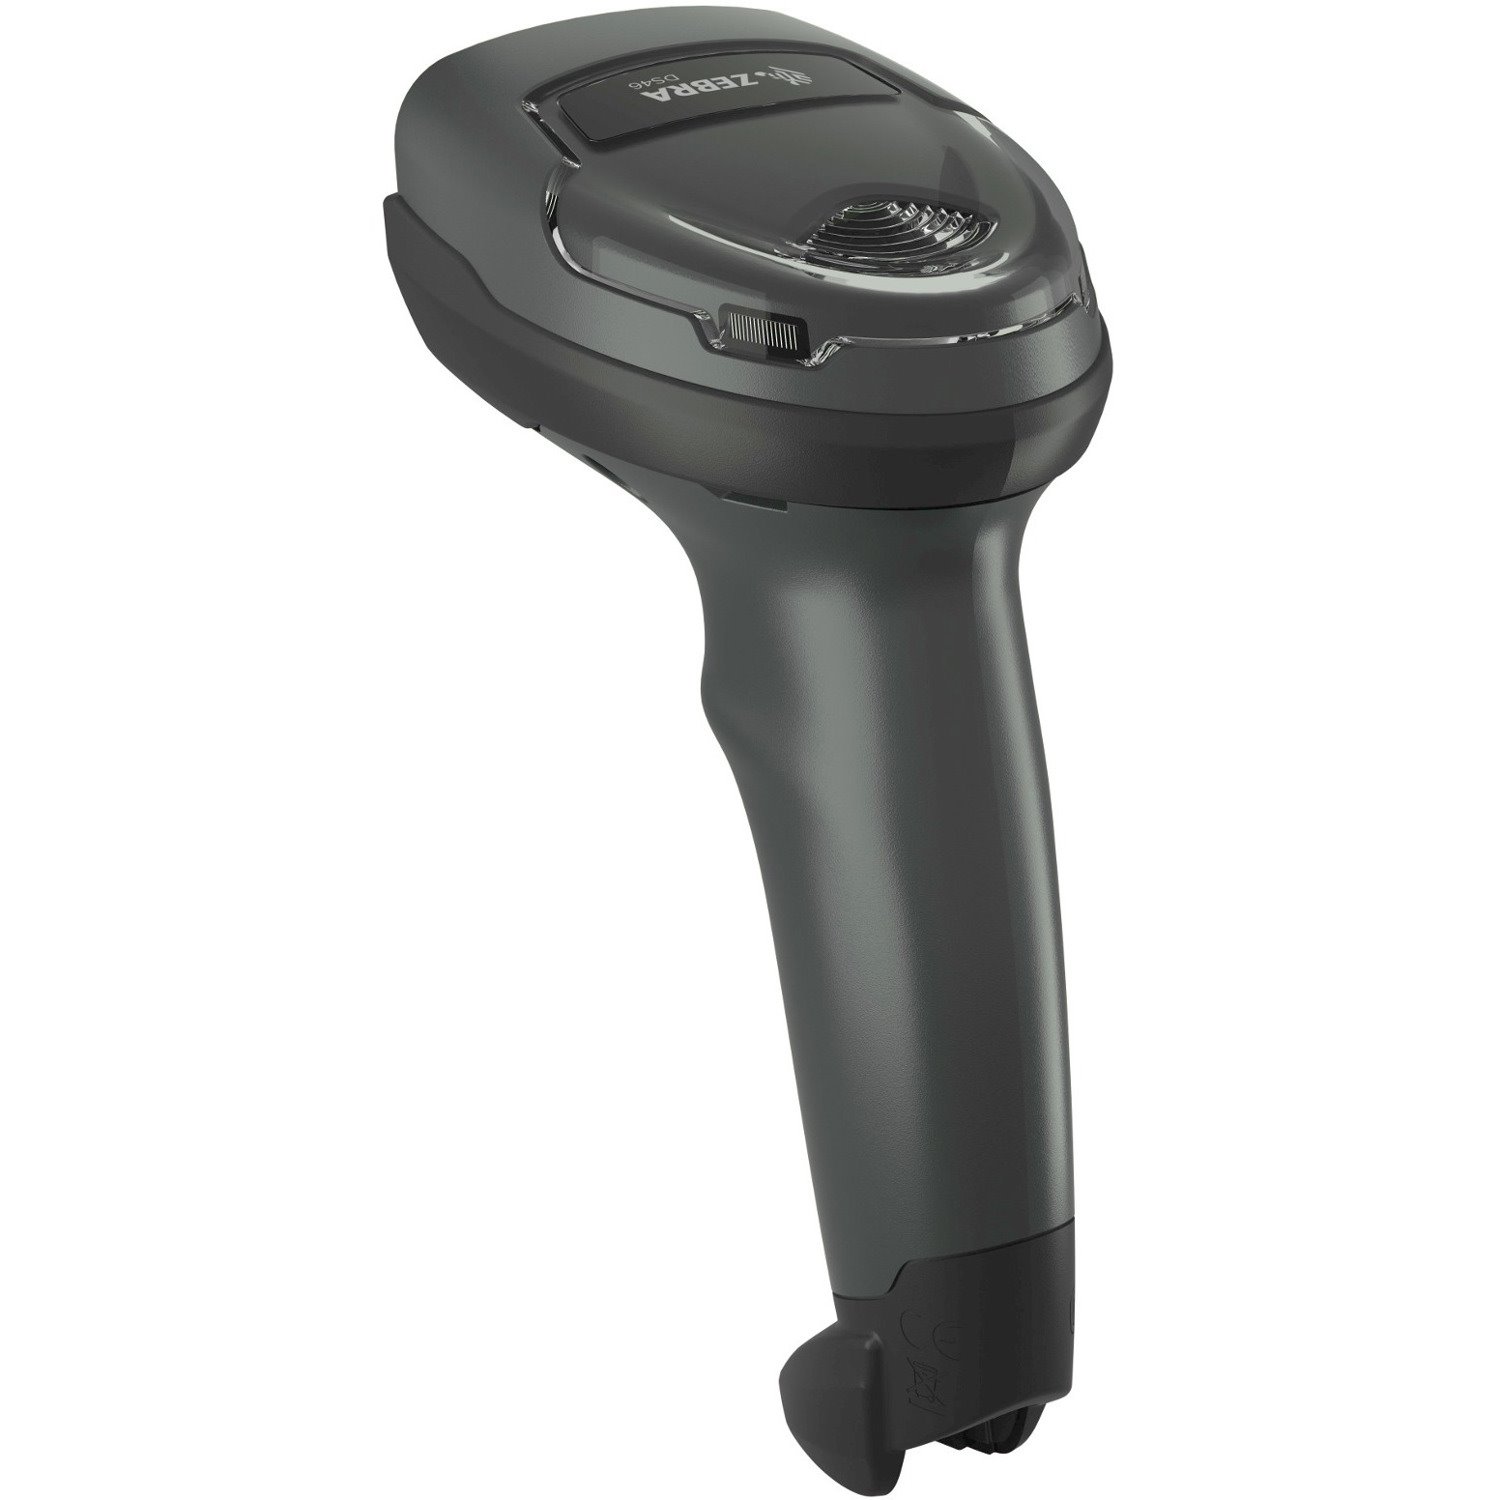 Zebra DS4608-HD Retail, Hospitality, Quick Service Restaurant (QSR), Inventory Handheld Barcode Scanner Kit - Cable Connectivity - Twilight Black - USB Cable Included